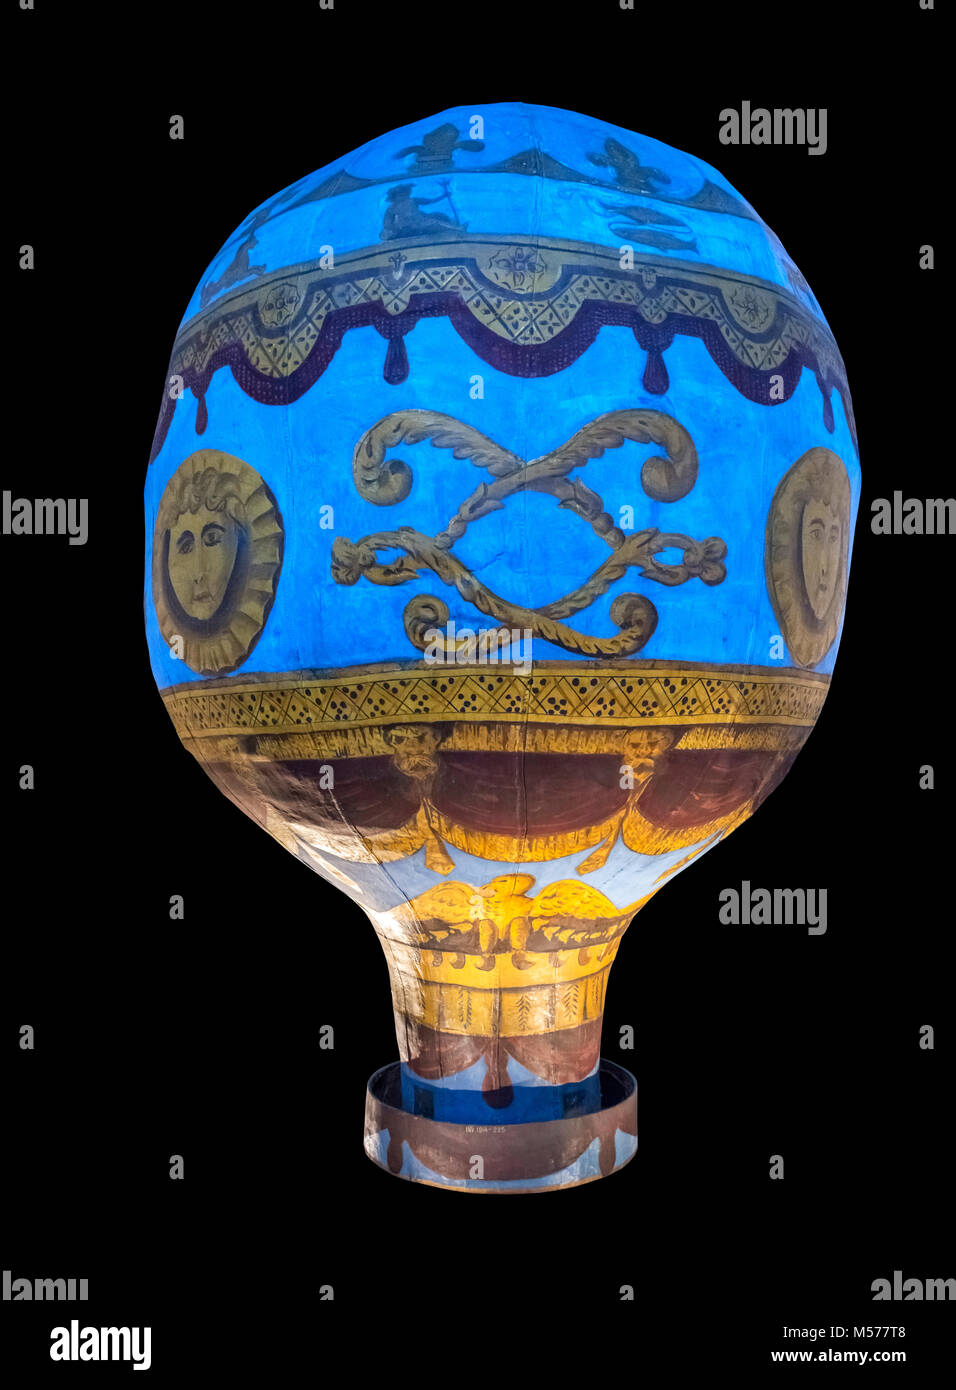 Montgolfier Balloon. A model of the balloon used for the first manned flight in November 1783, Science Museum, London Stock Photo